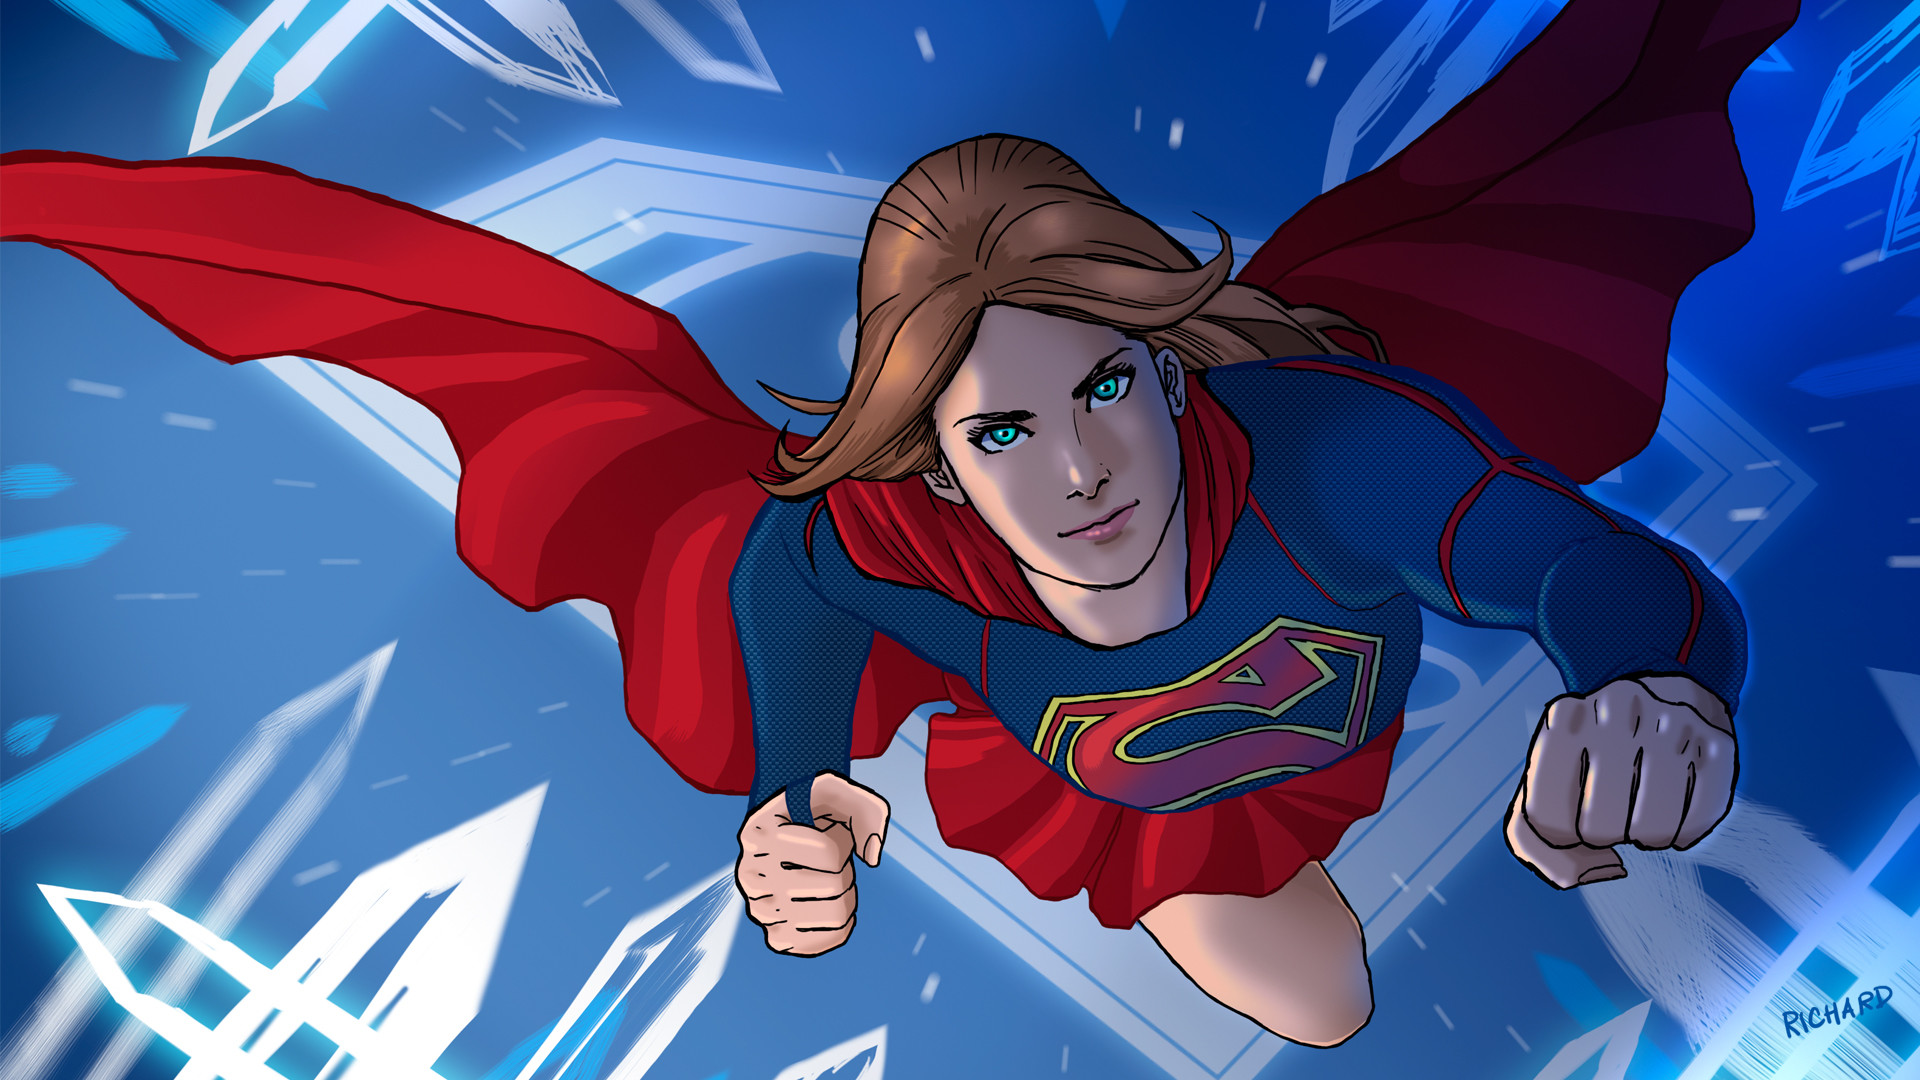 Supergirl' Movie Rumored To Start Production In 2020 - FandomWire